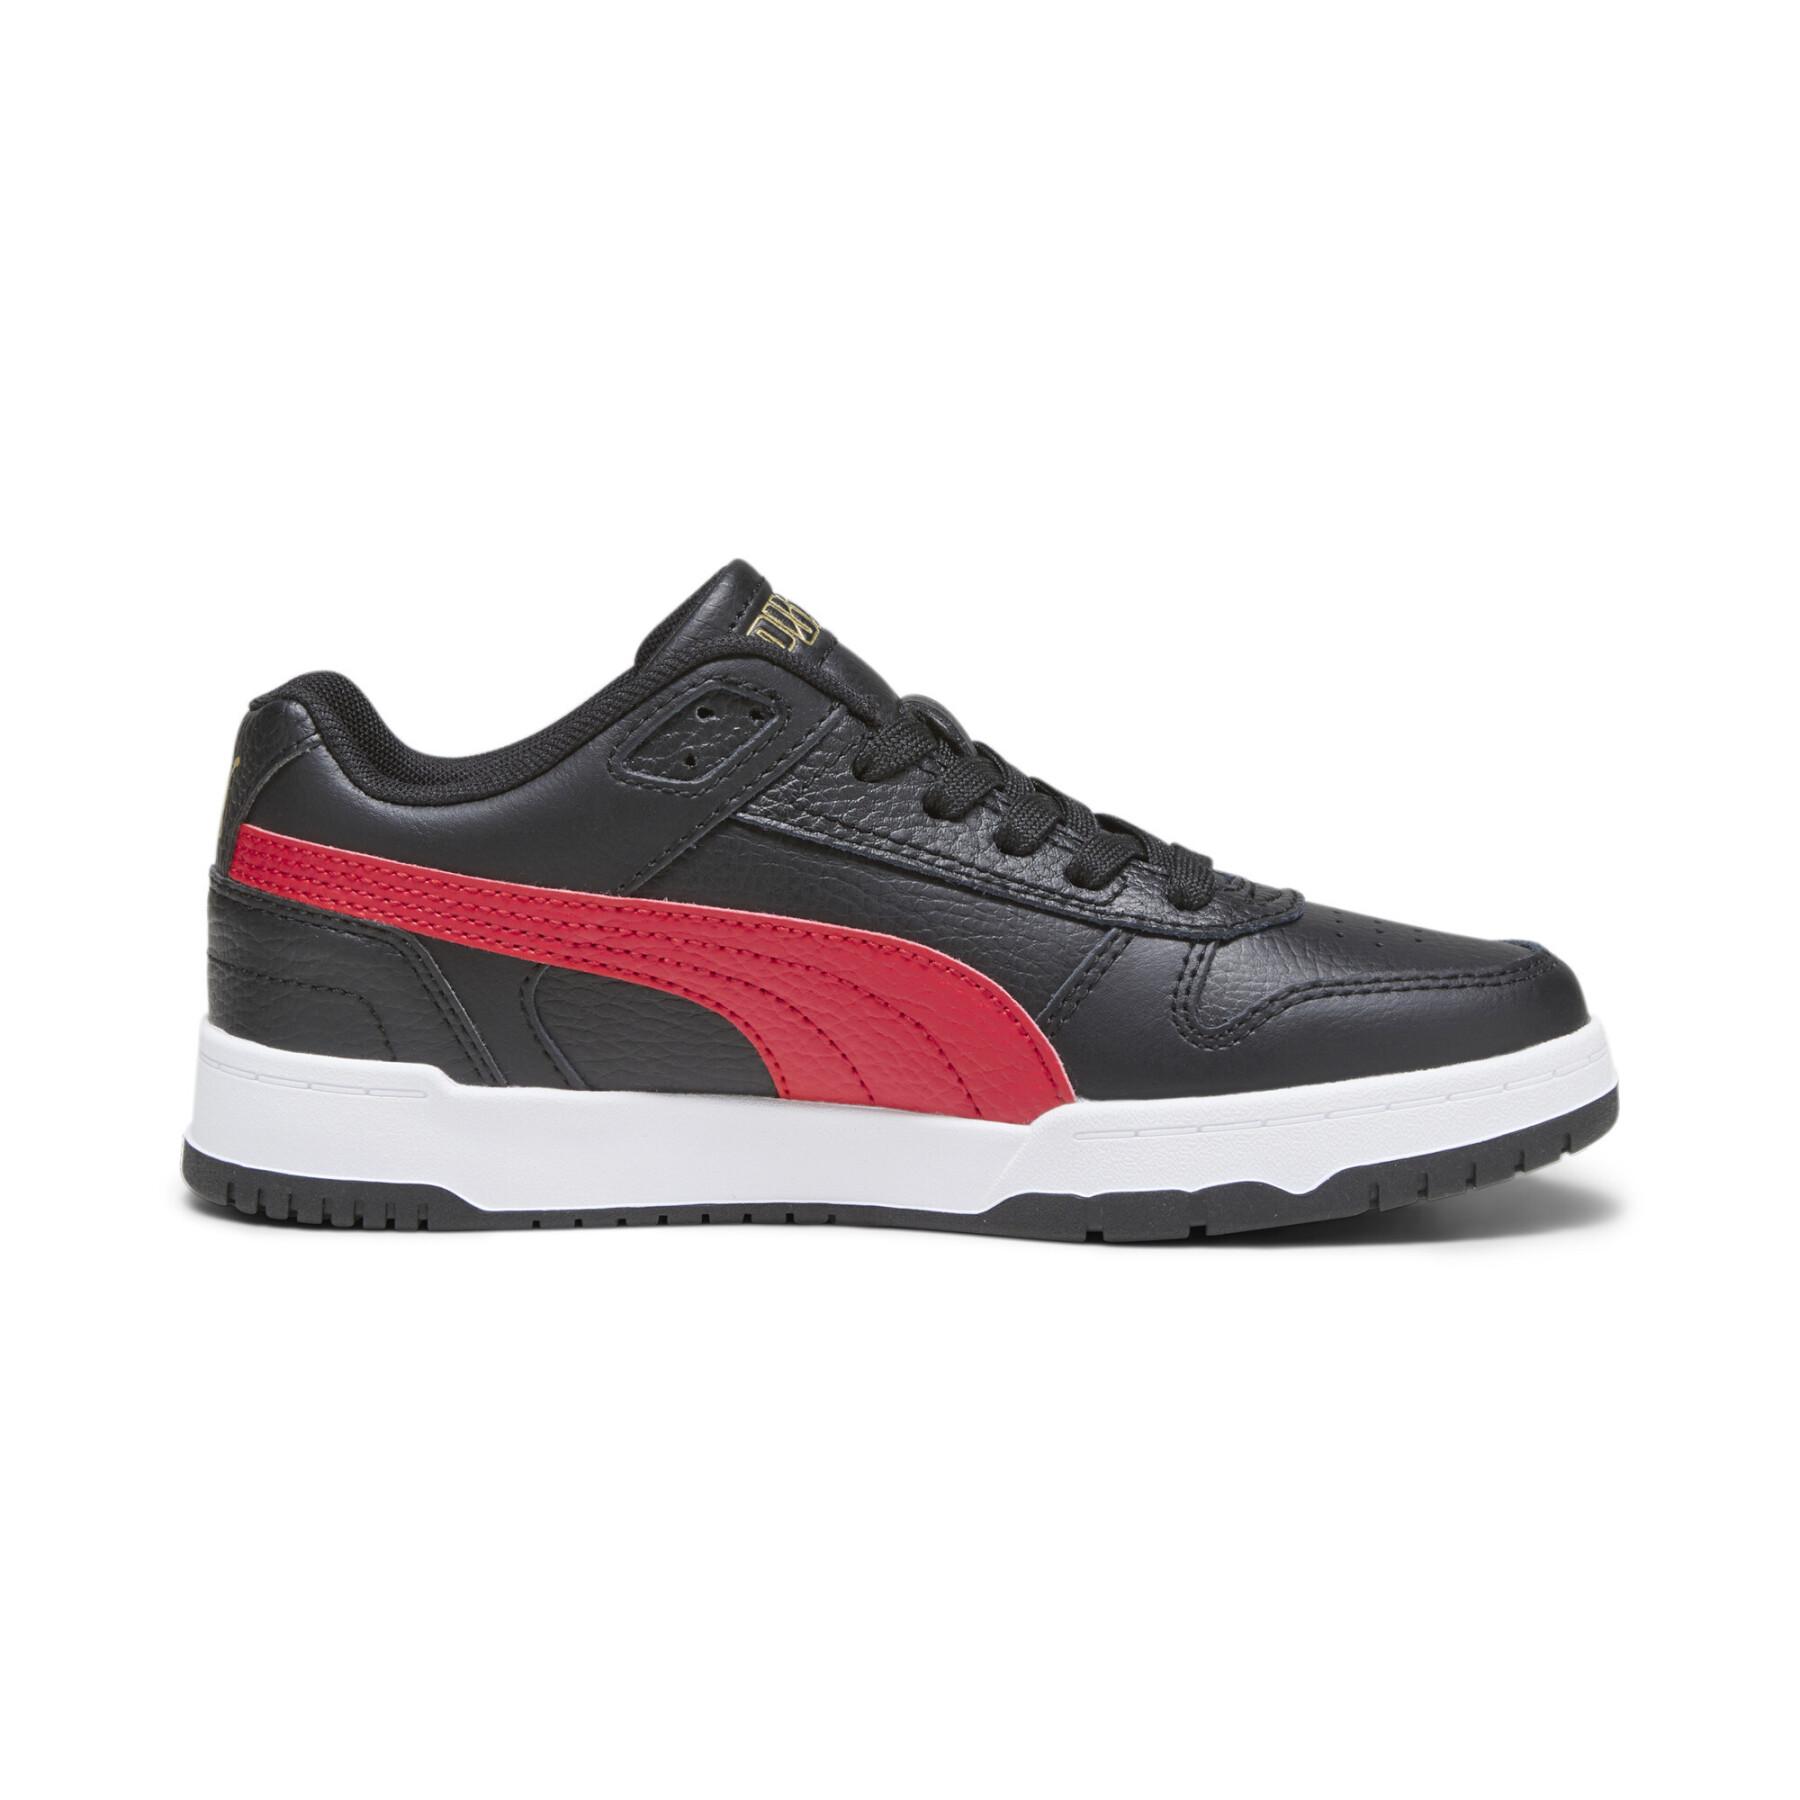 Sneakers low child Puma Rbd Game